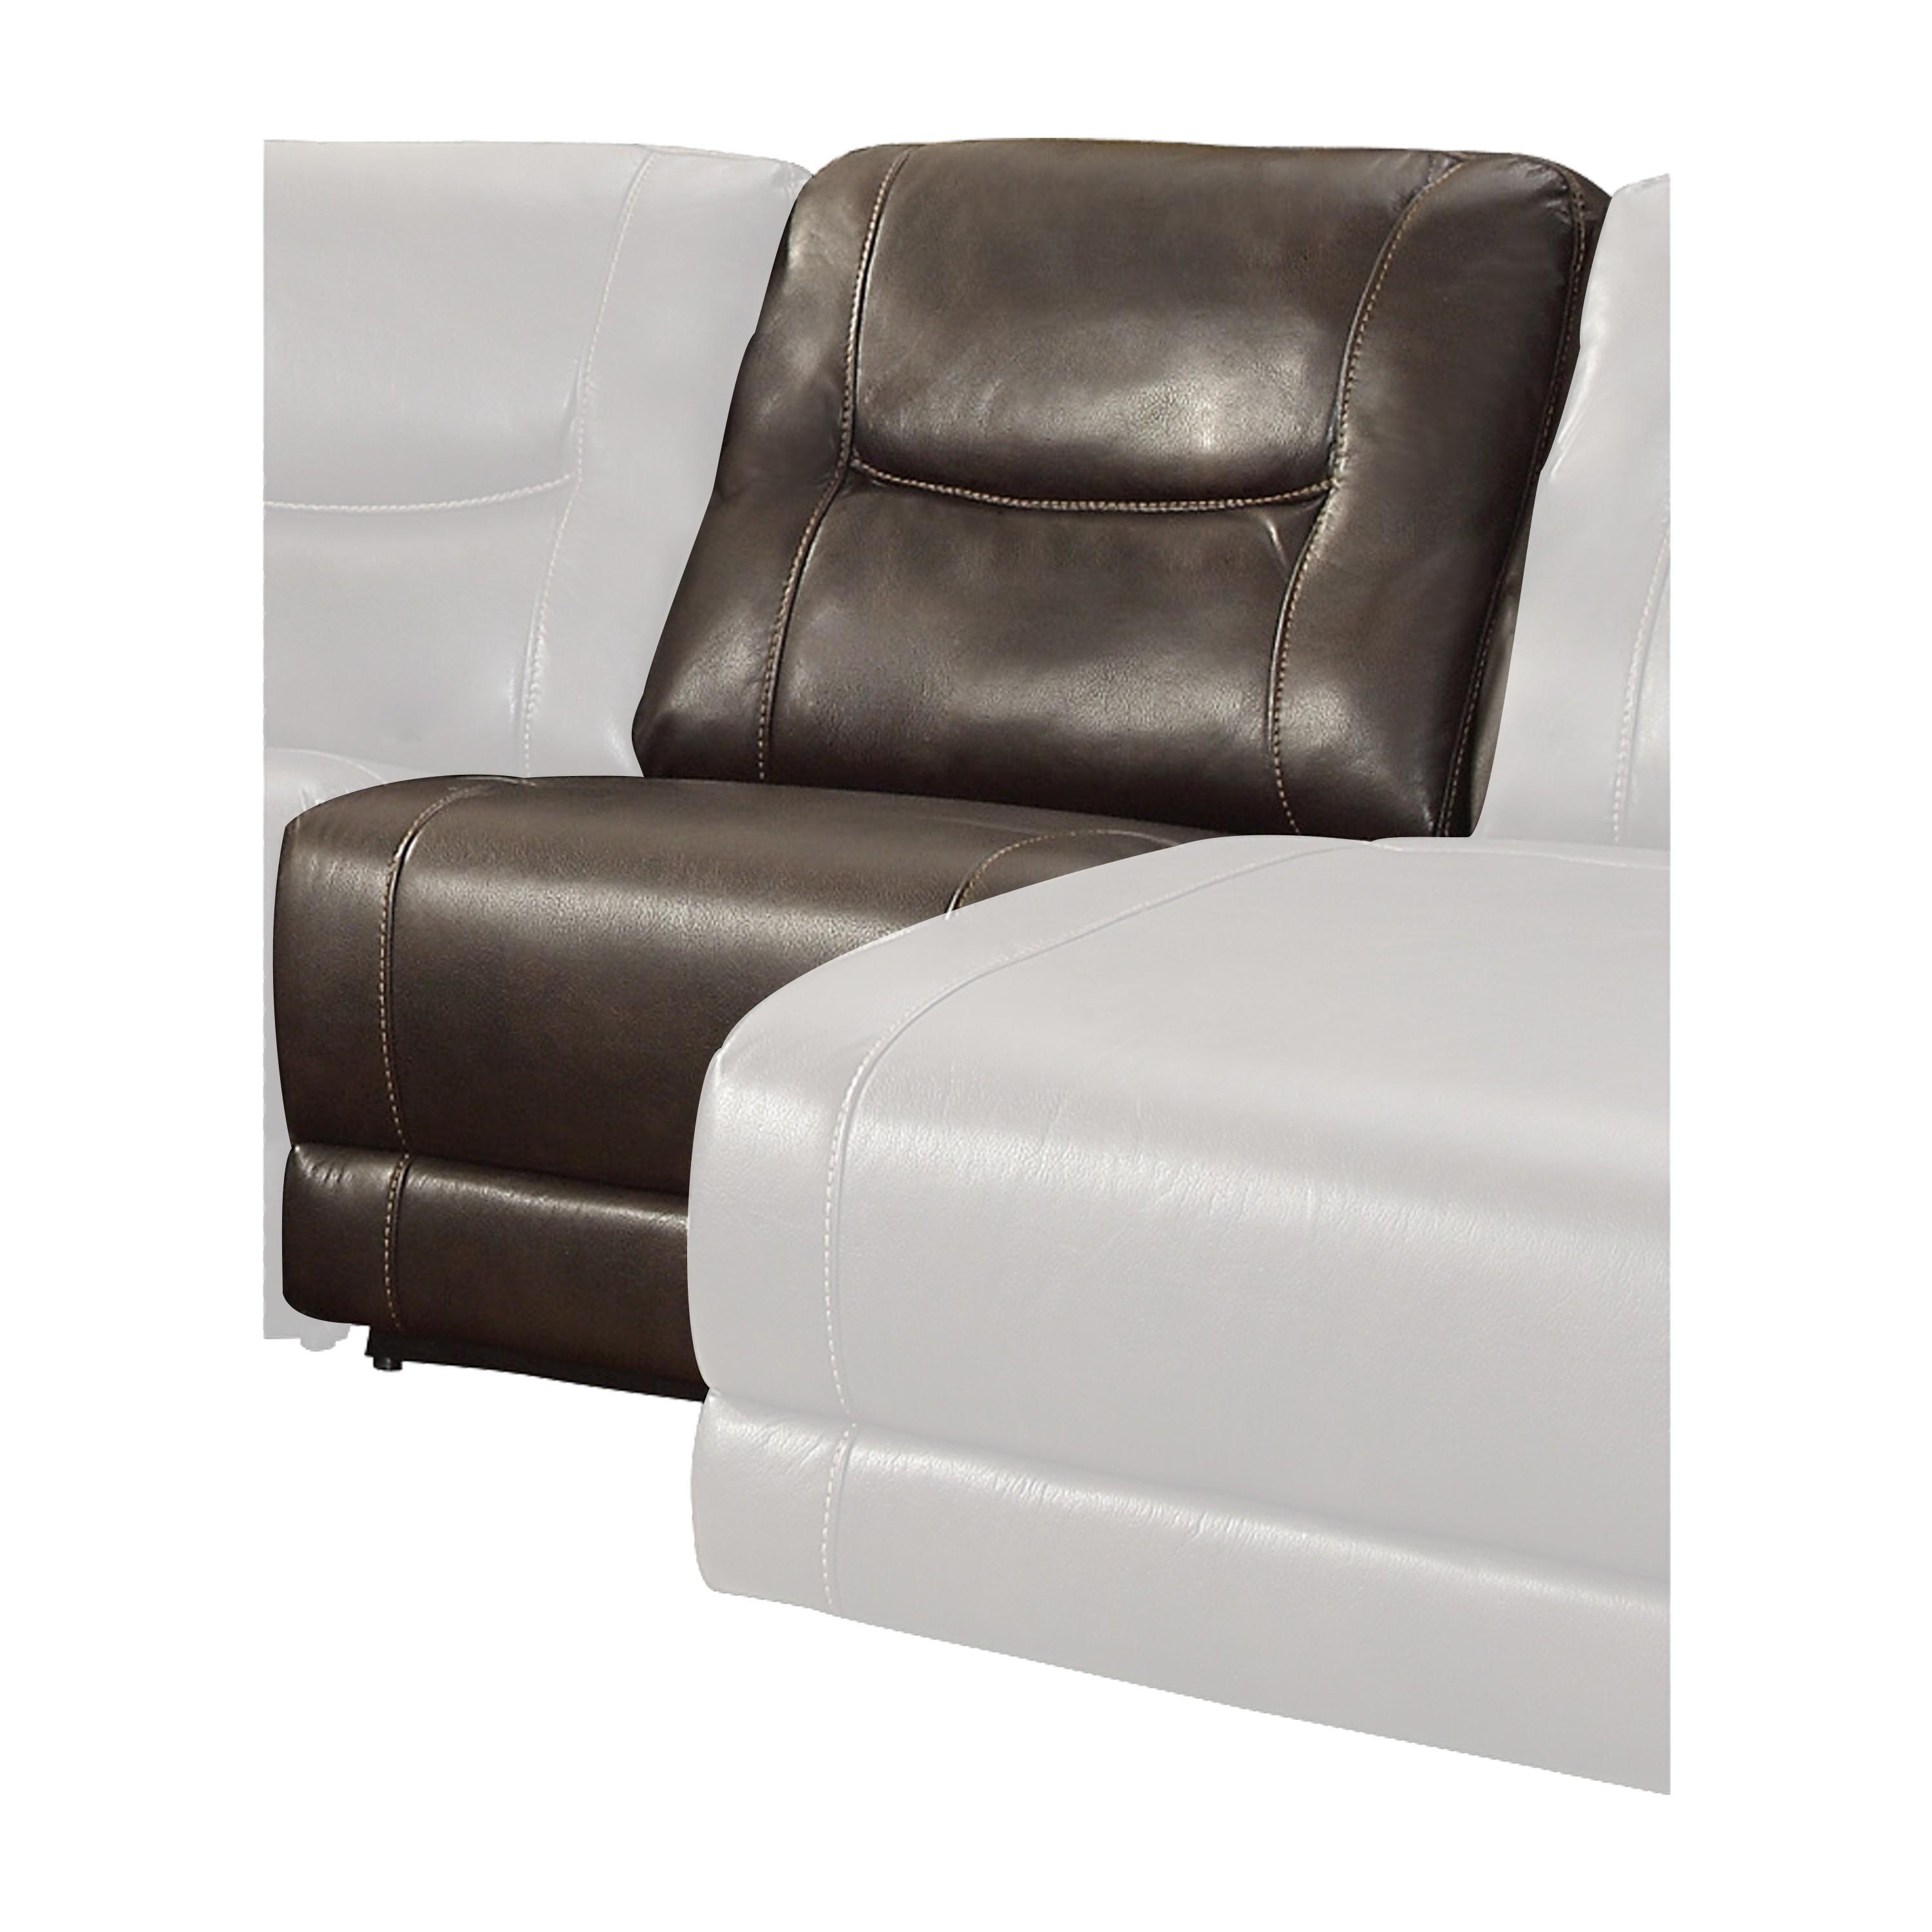 Modern Armless Reclining Chair 8490-AR Columbus 8490-AR in Brown Faux Leather